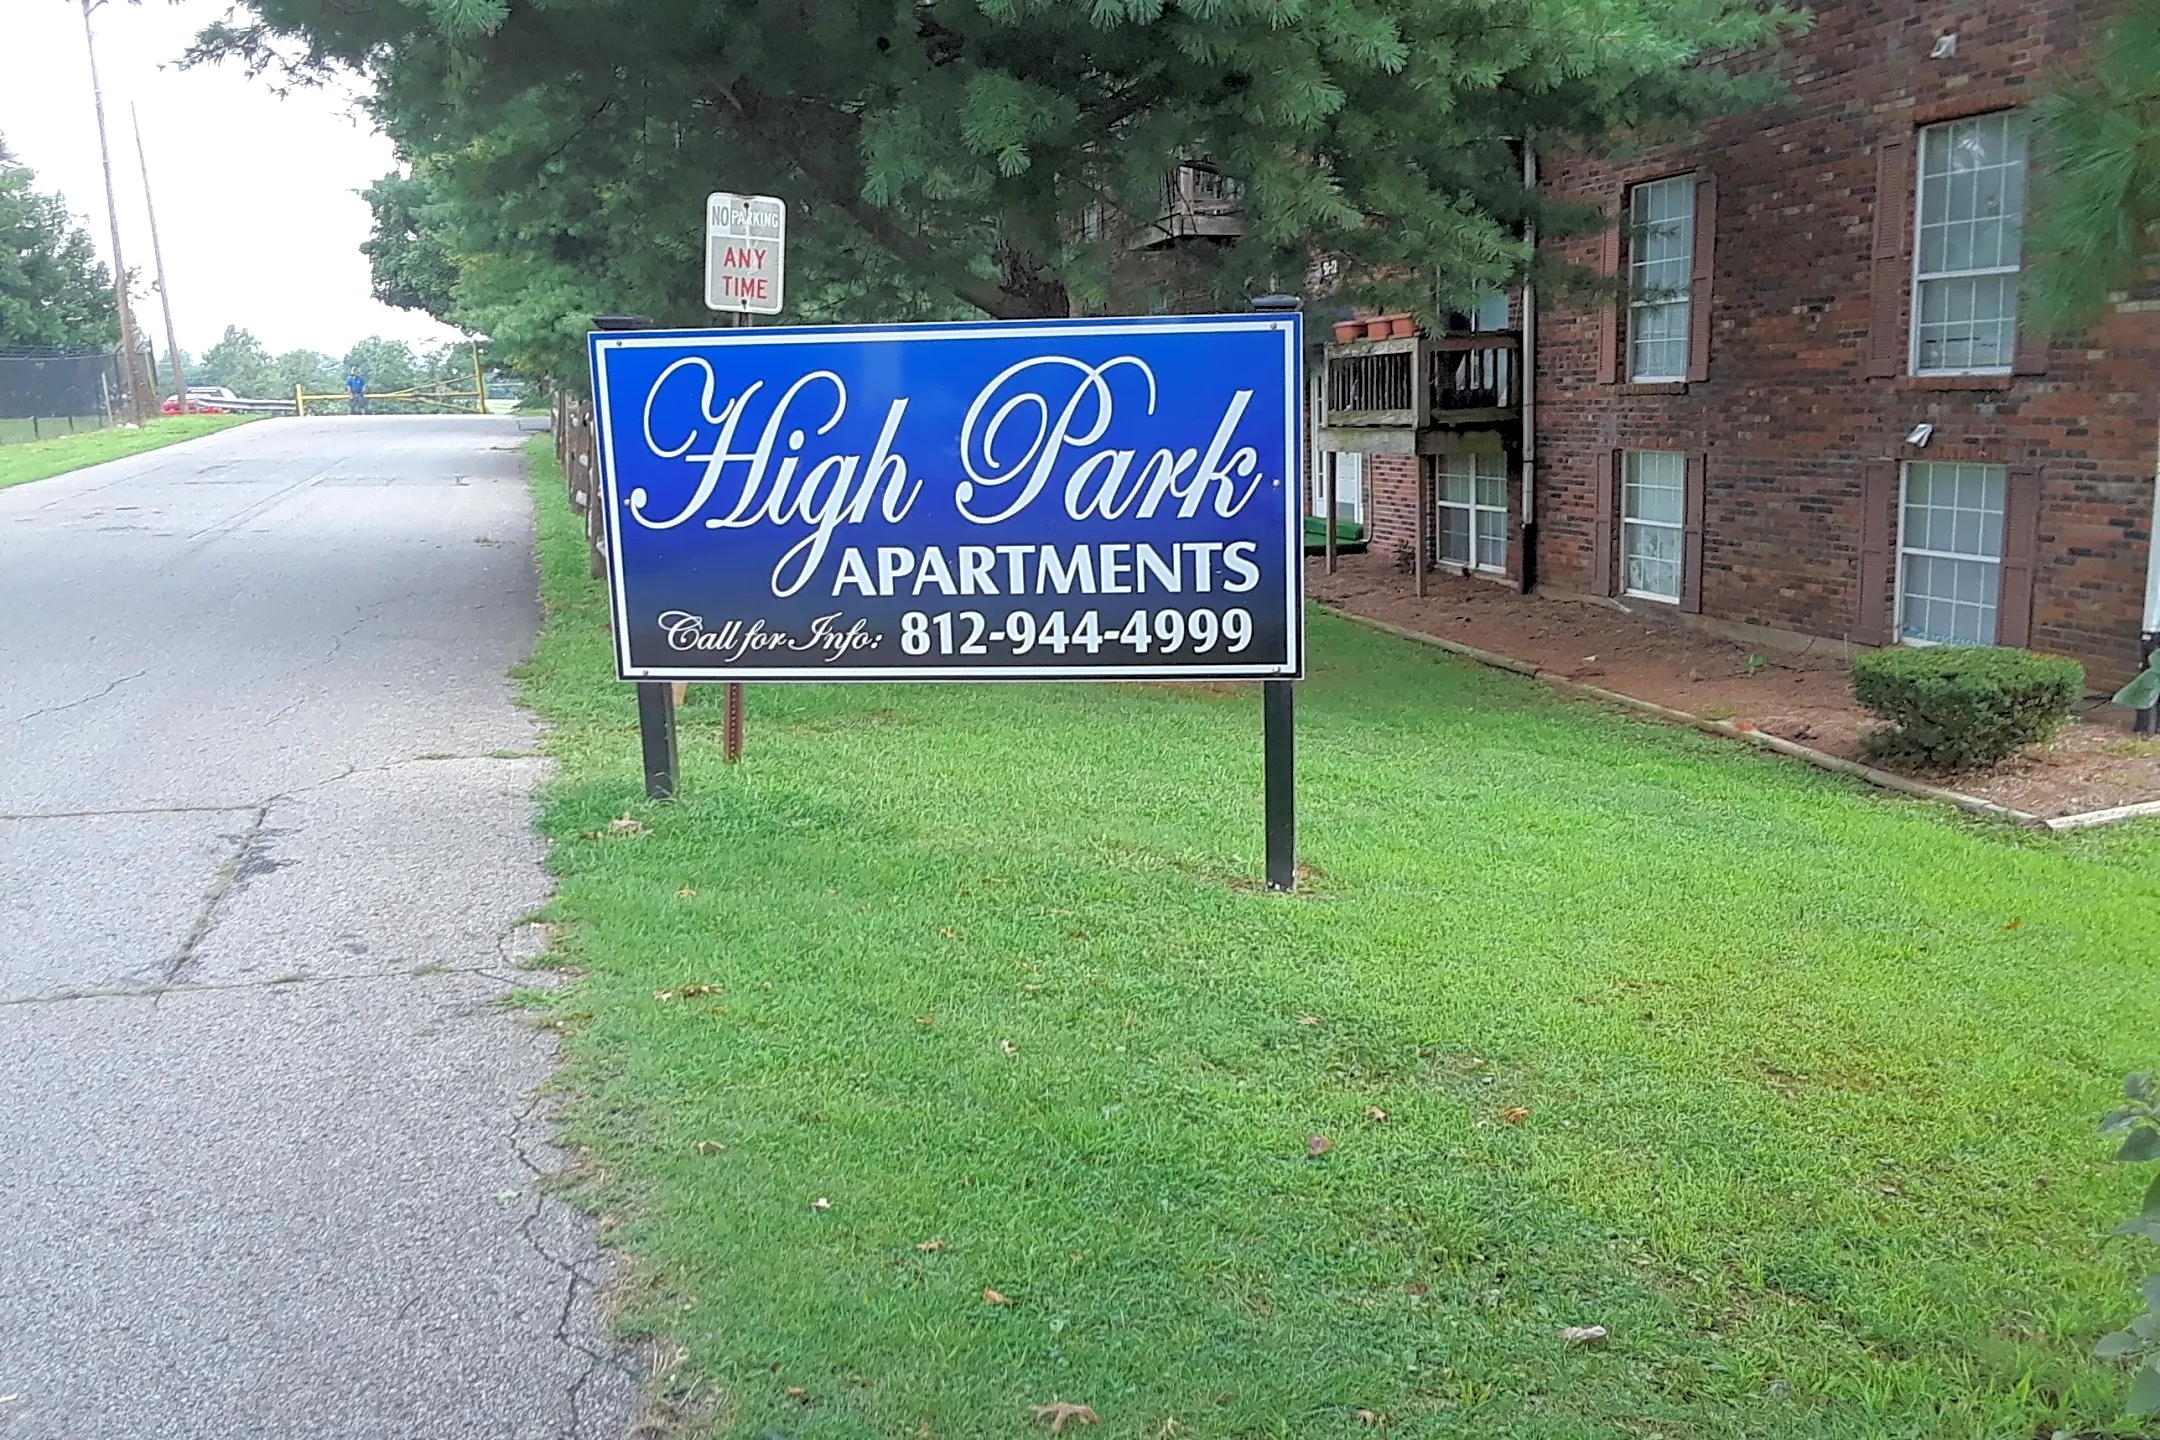 Pool - High Park Apartments - New Albany, IN